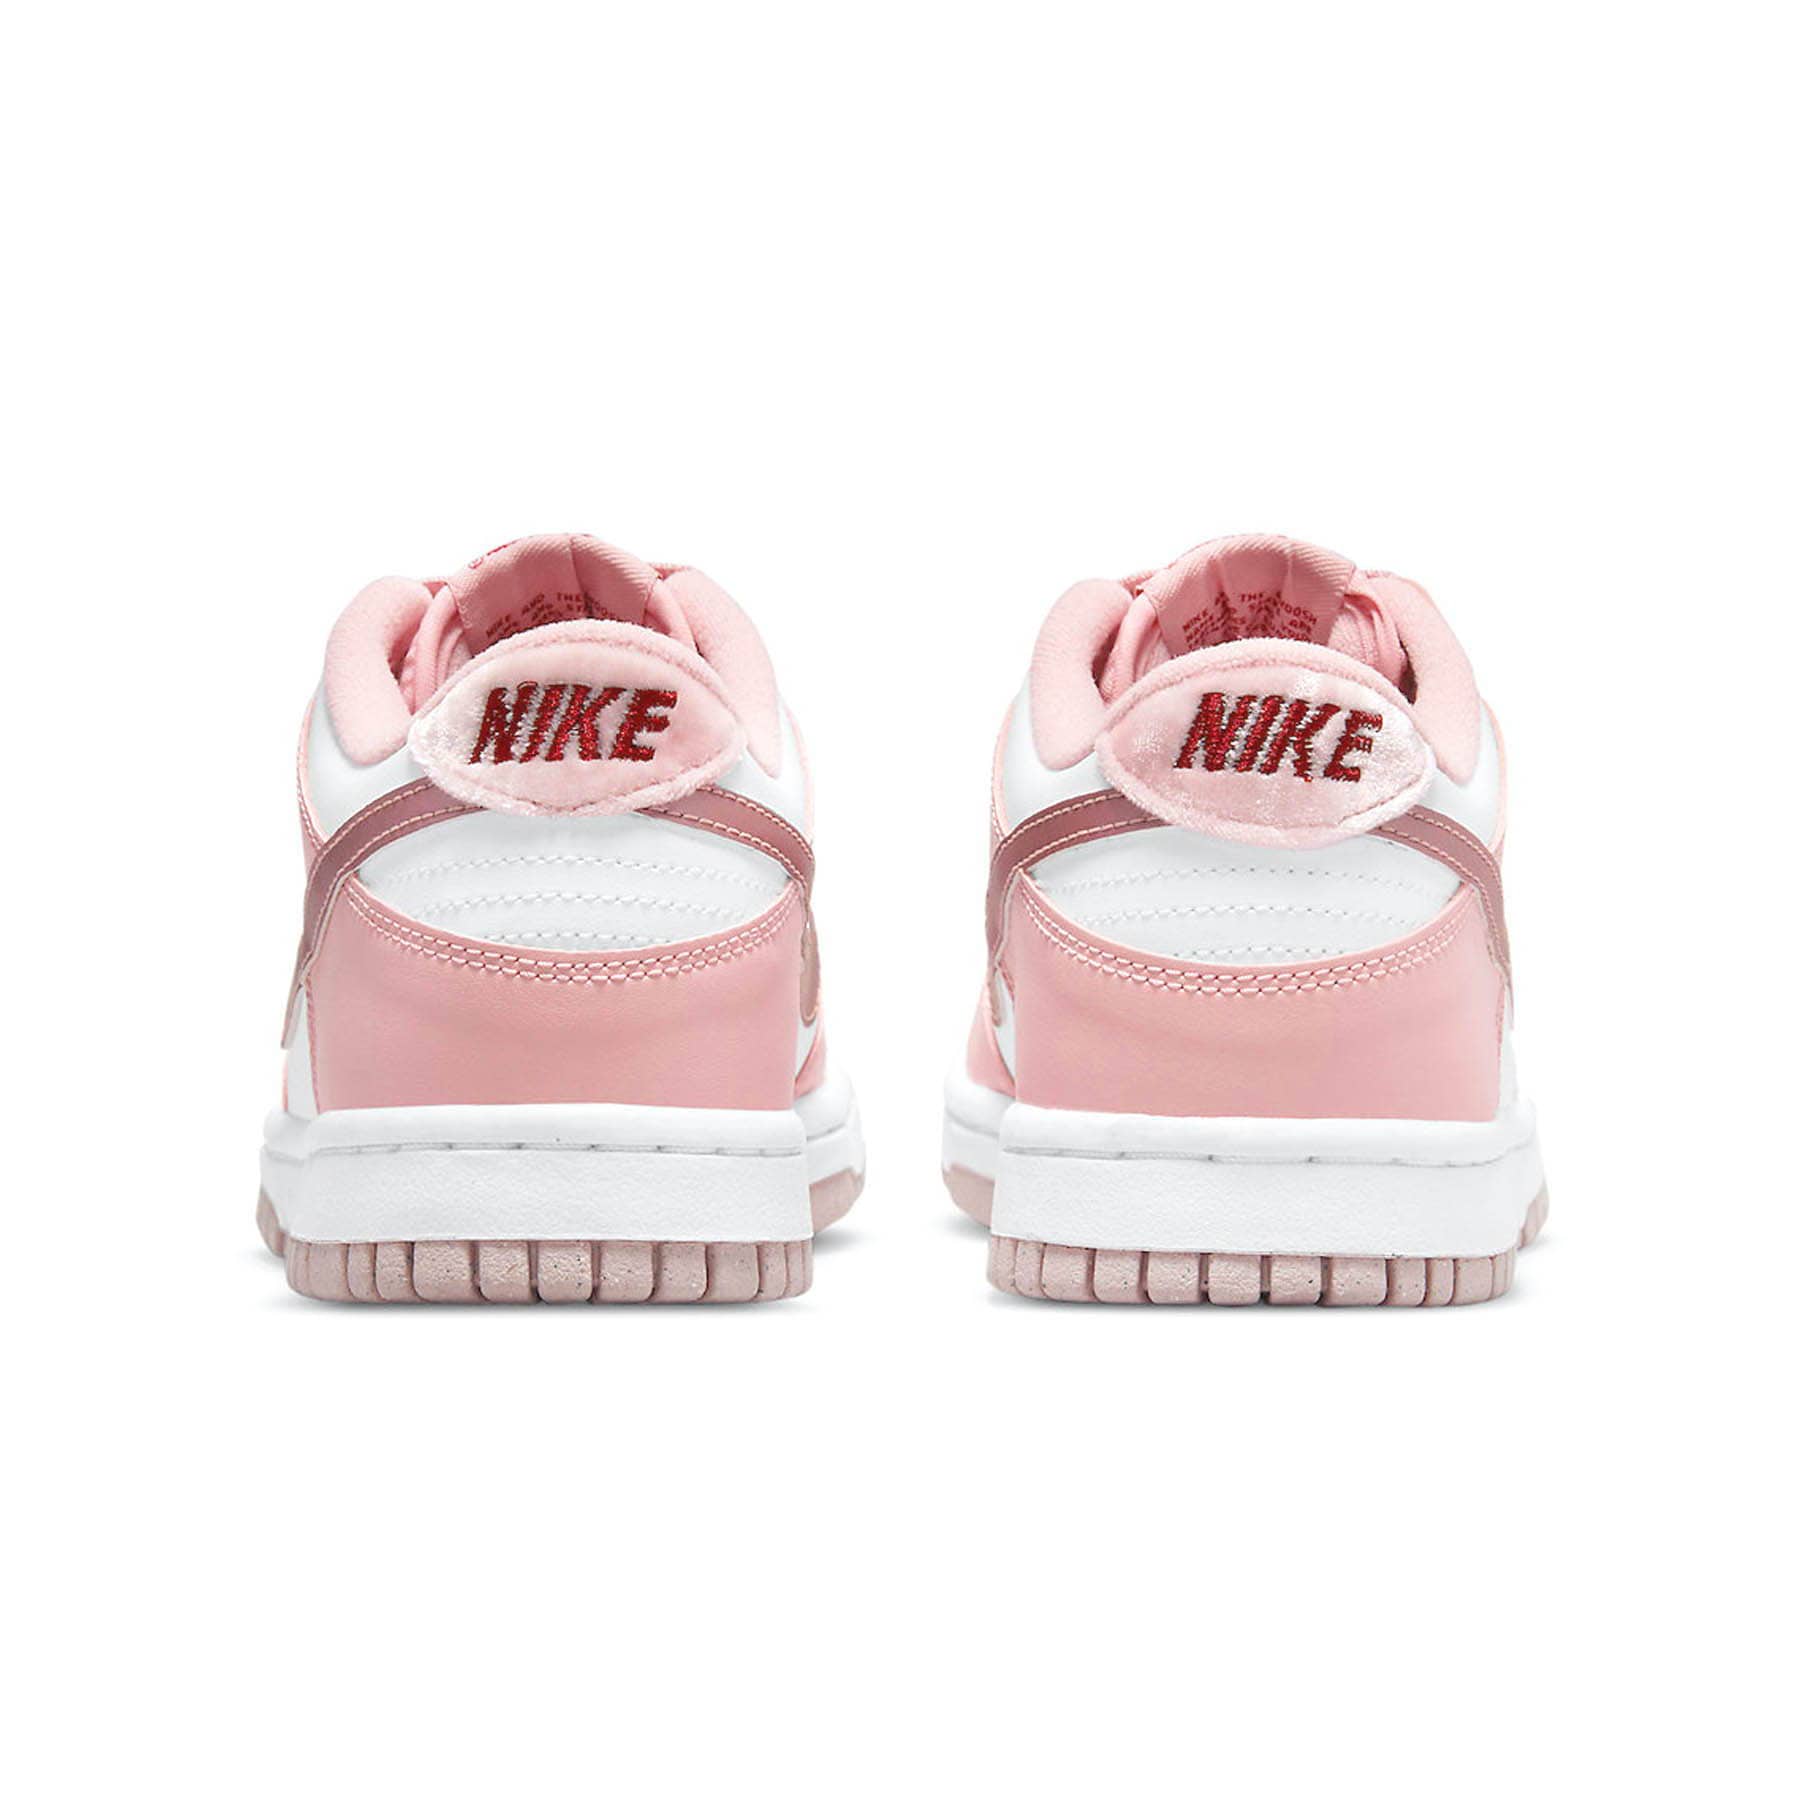 Double Boxed  274.99 Nike Dunk Low Pink Velvet Double Boxed